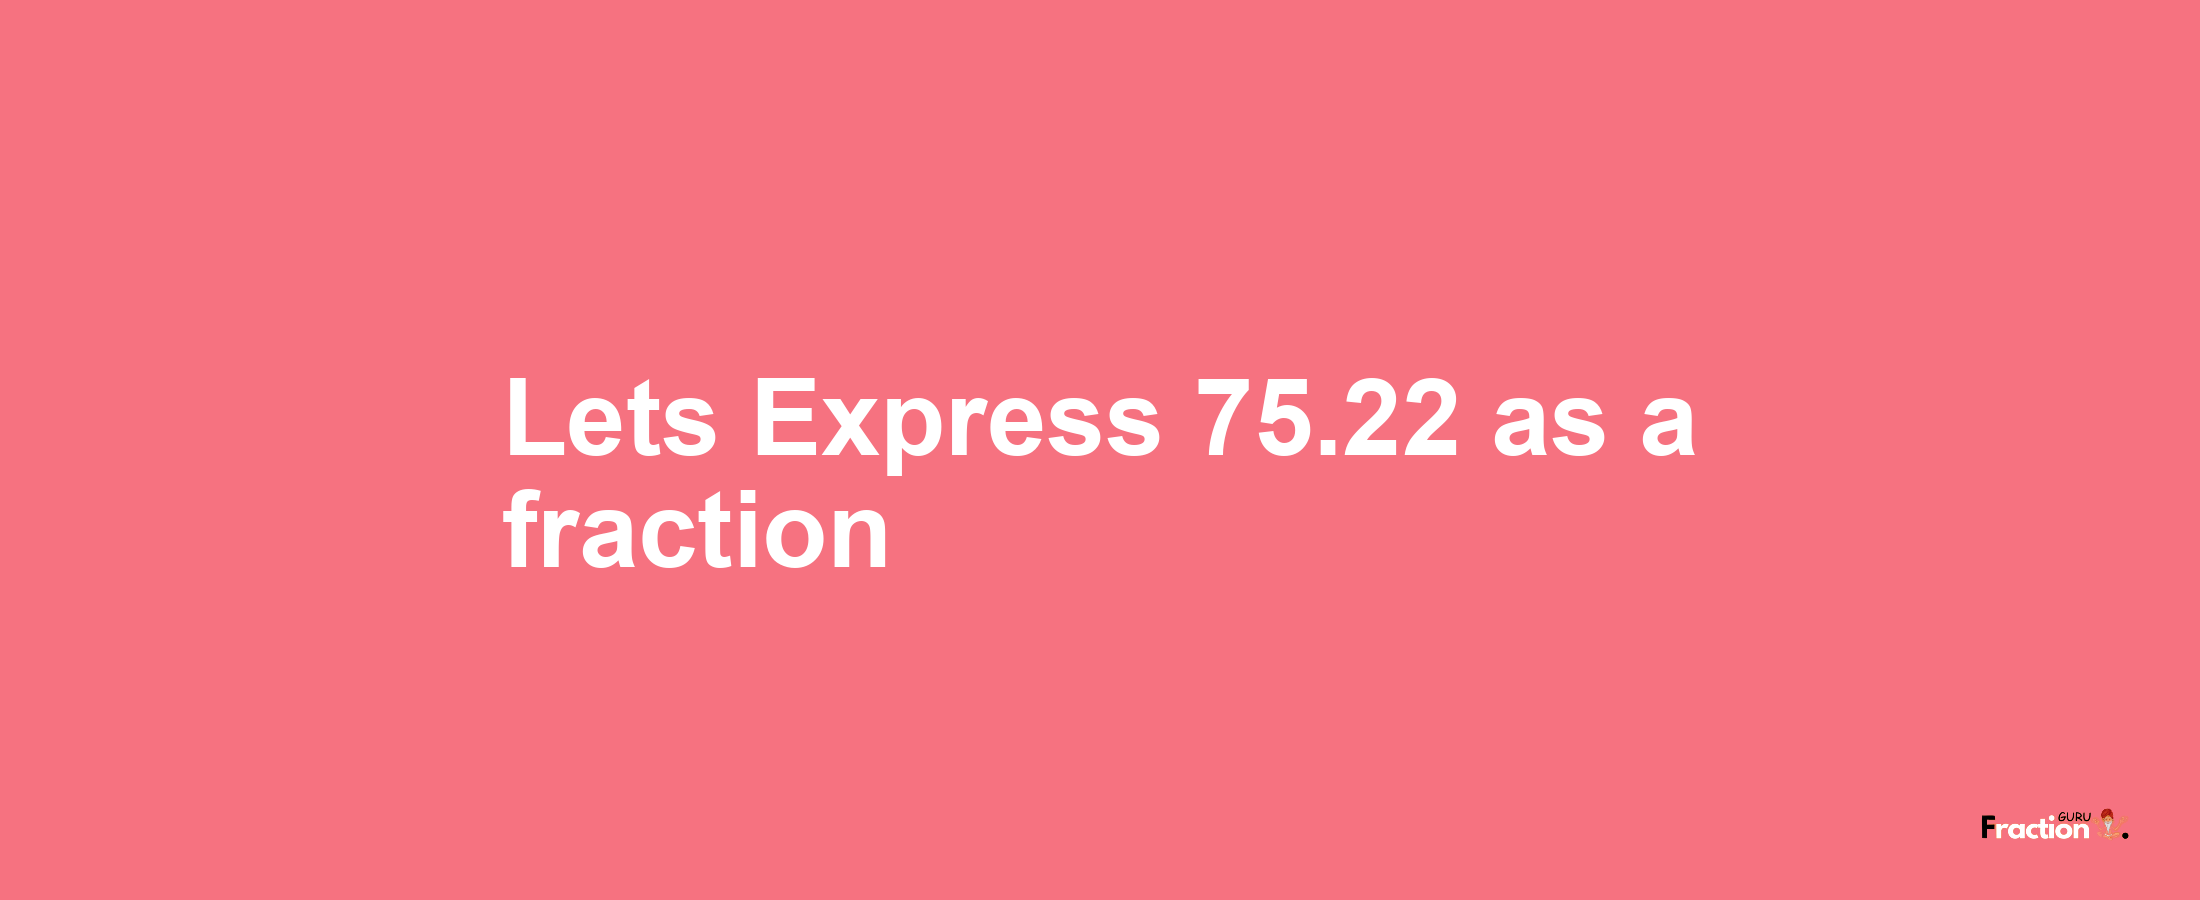 Lets Express 75.22 as afraction